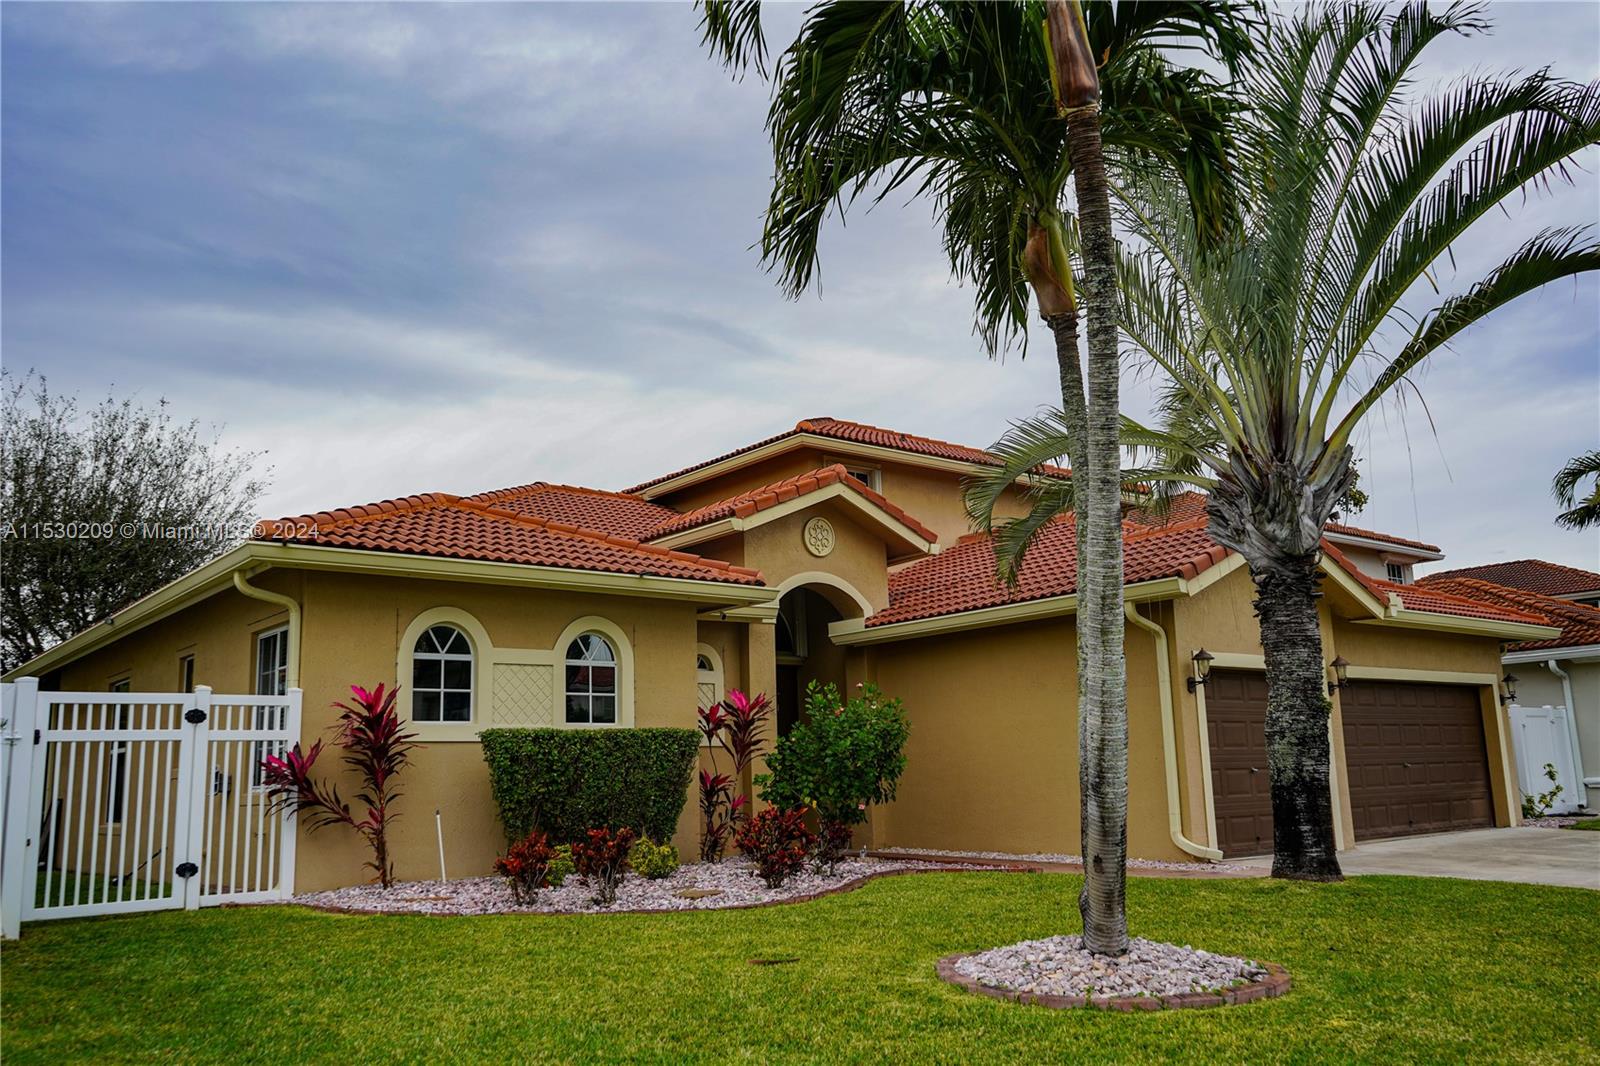 Property for Sale at 3414 Harness Cir Cir, Lake Worth, Palm Beach County, Florida - Bedrooms: 4 
Bathrooms: 3  - $775,000